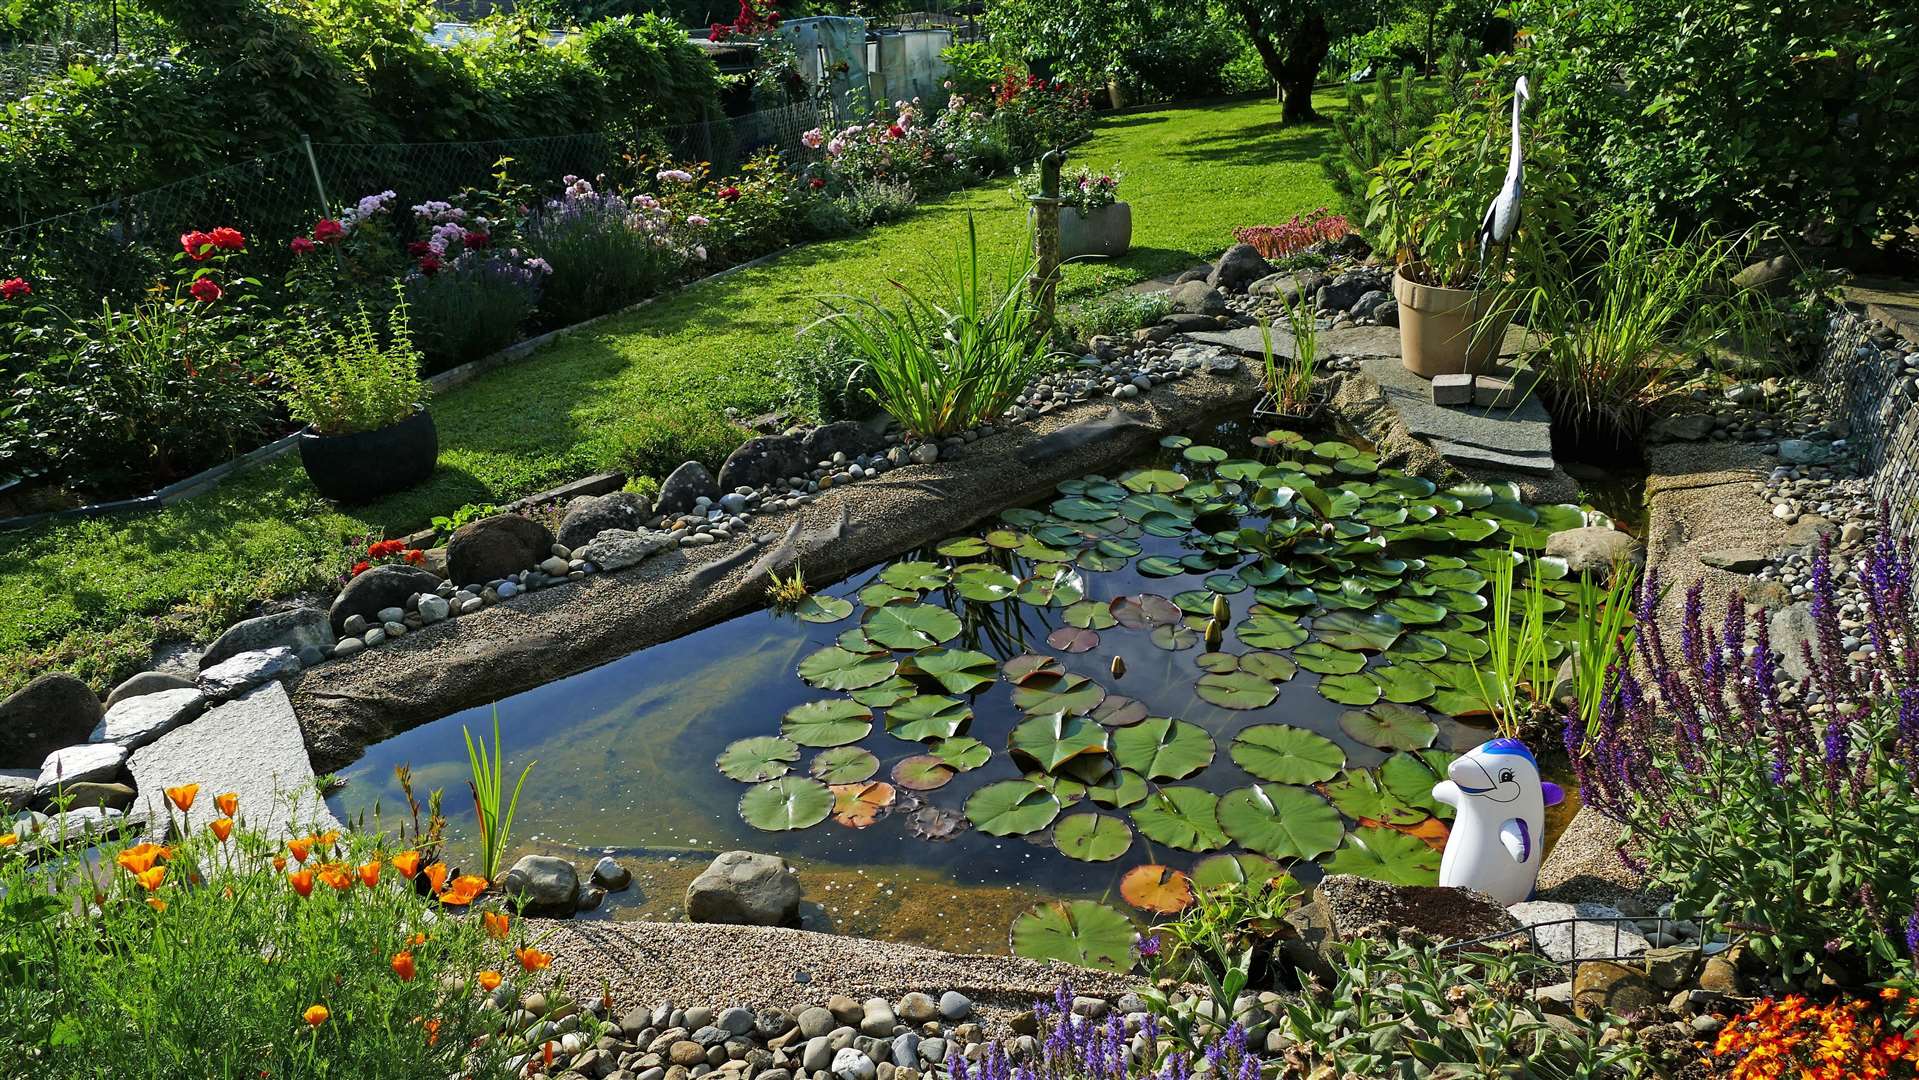 Ponds can help attract a wide range of wildlife.